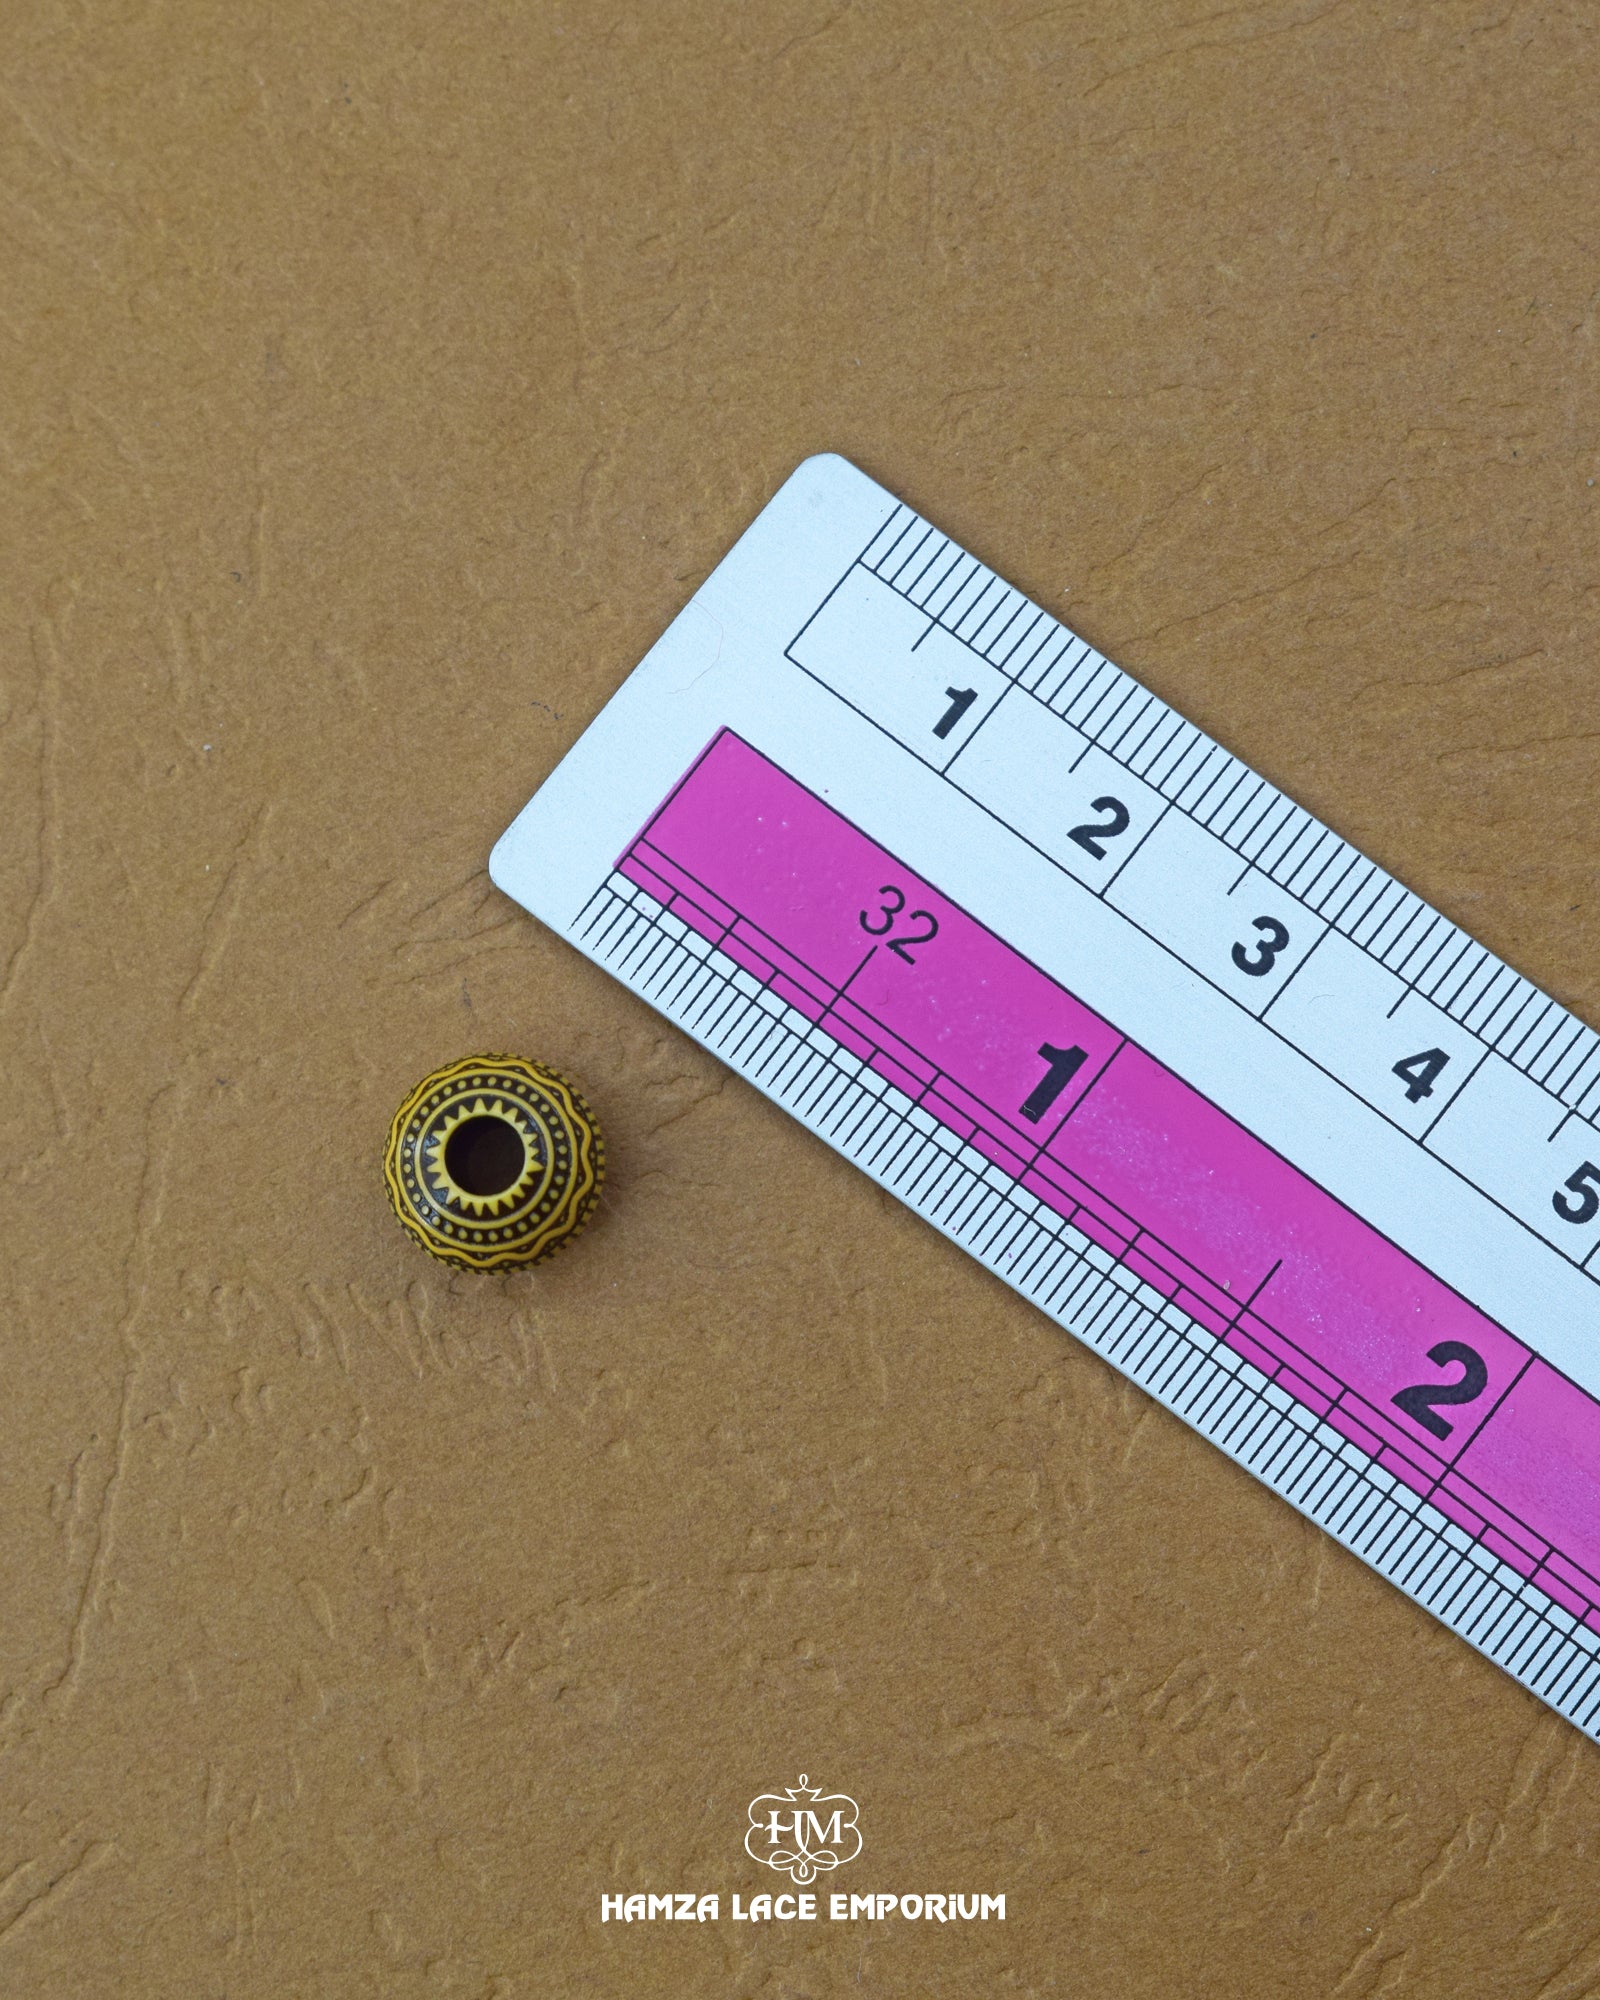 The size of the Beautifully designed 'Loop Design Button MA391' is measured by using a ruler